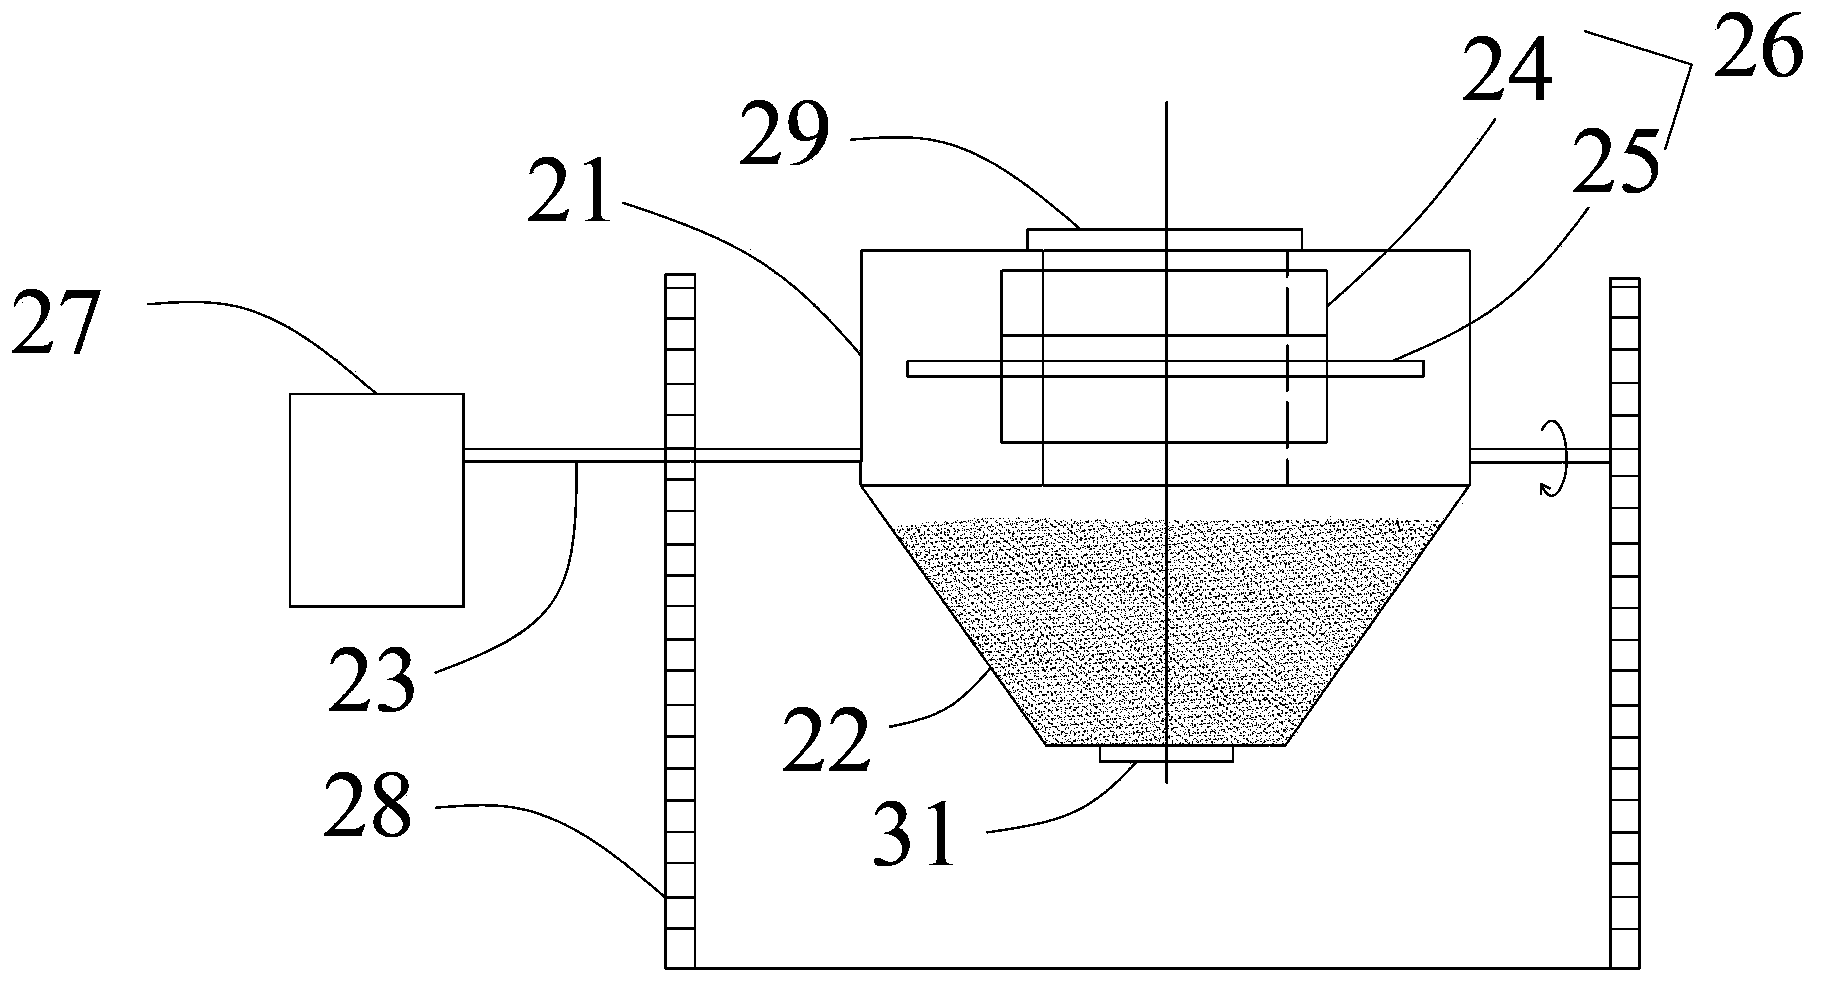 Square-tapered rotary mixer